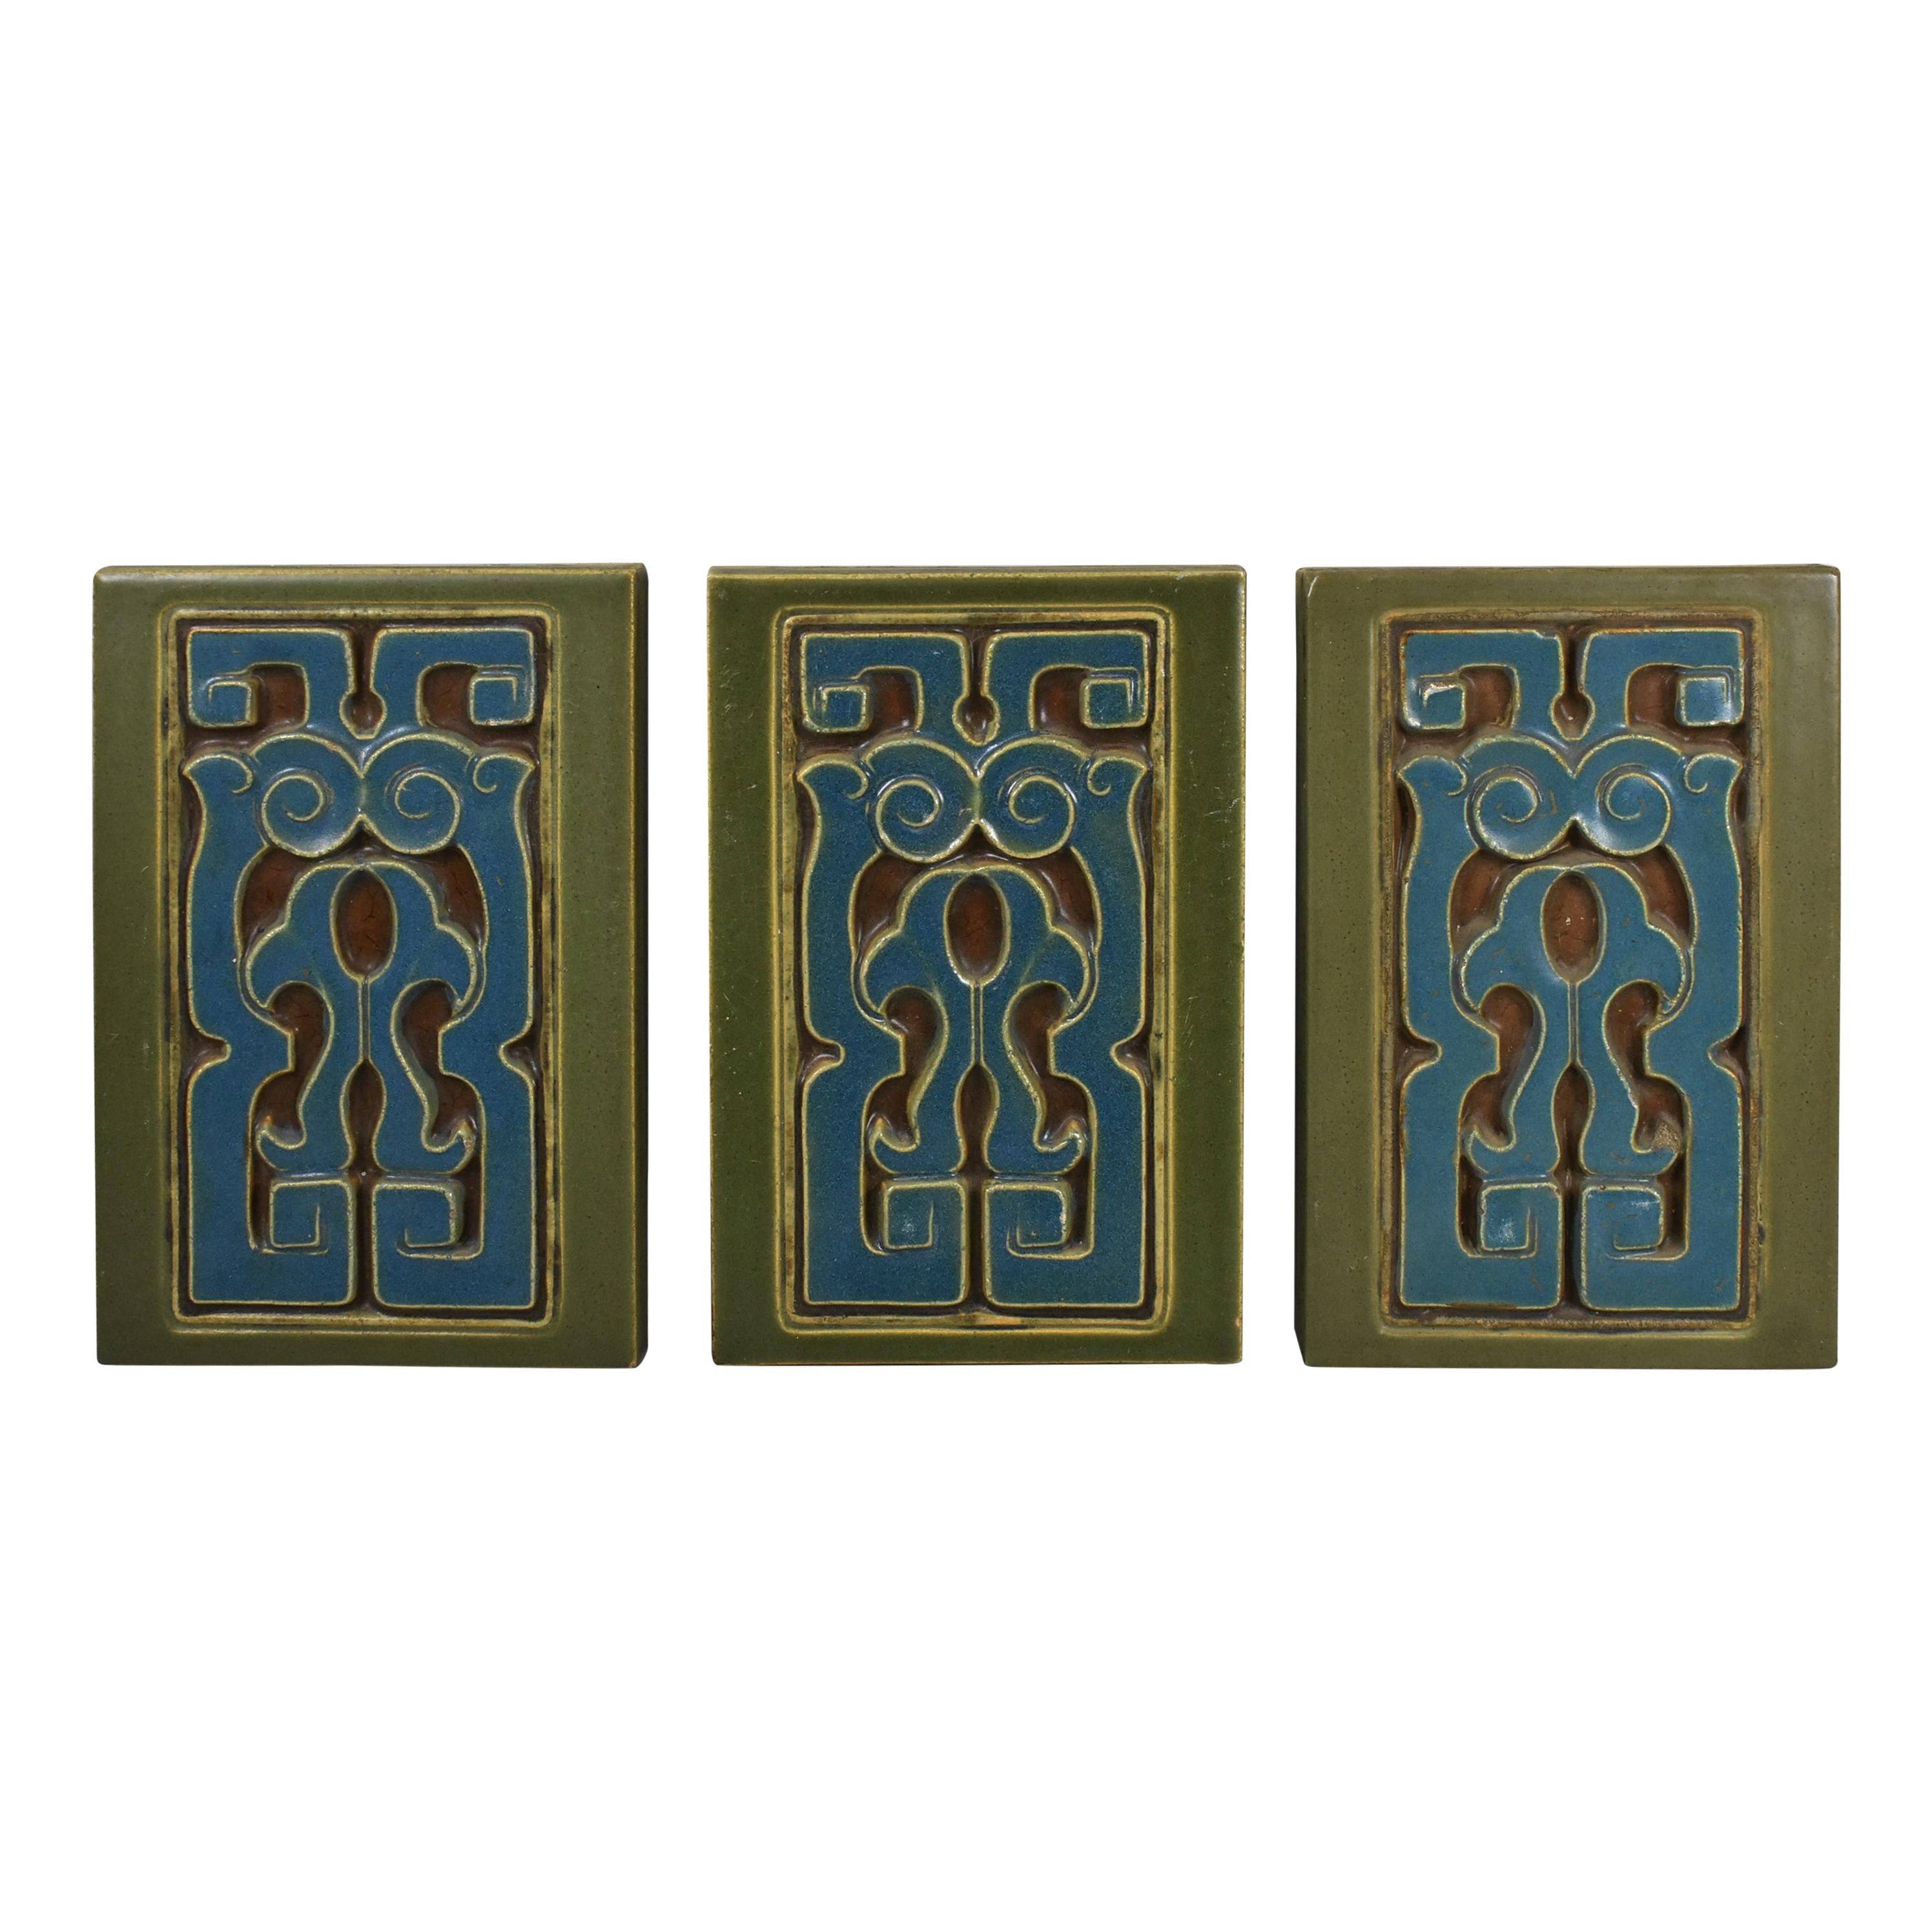 Three Arts &Crafts Rookwood Pottery Co. Stylized Architectural Faience Tiles 